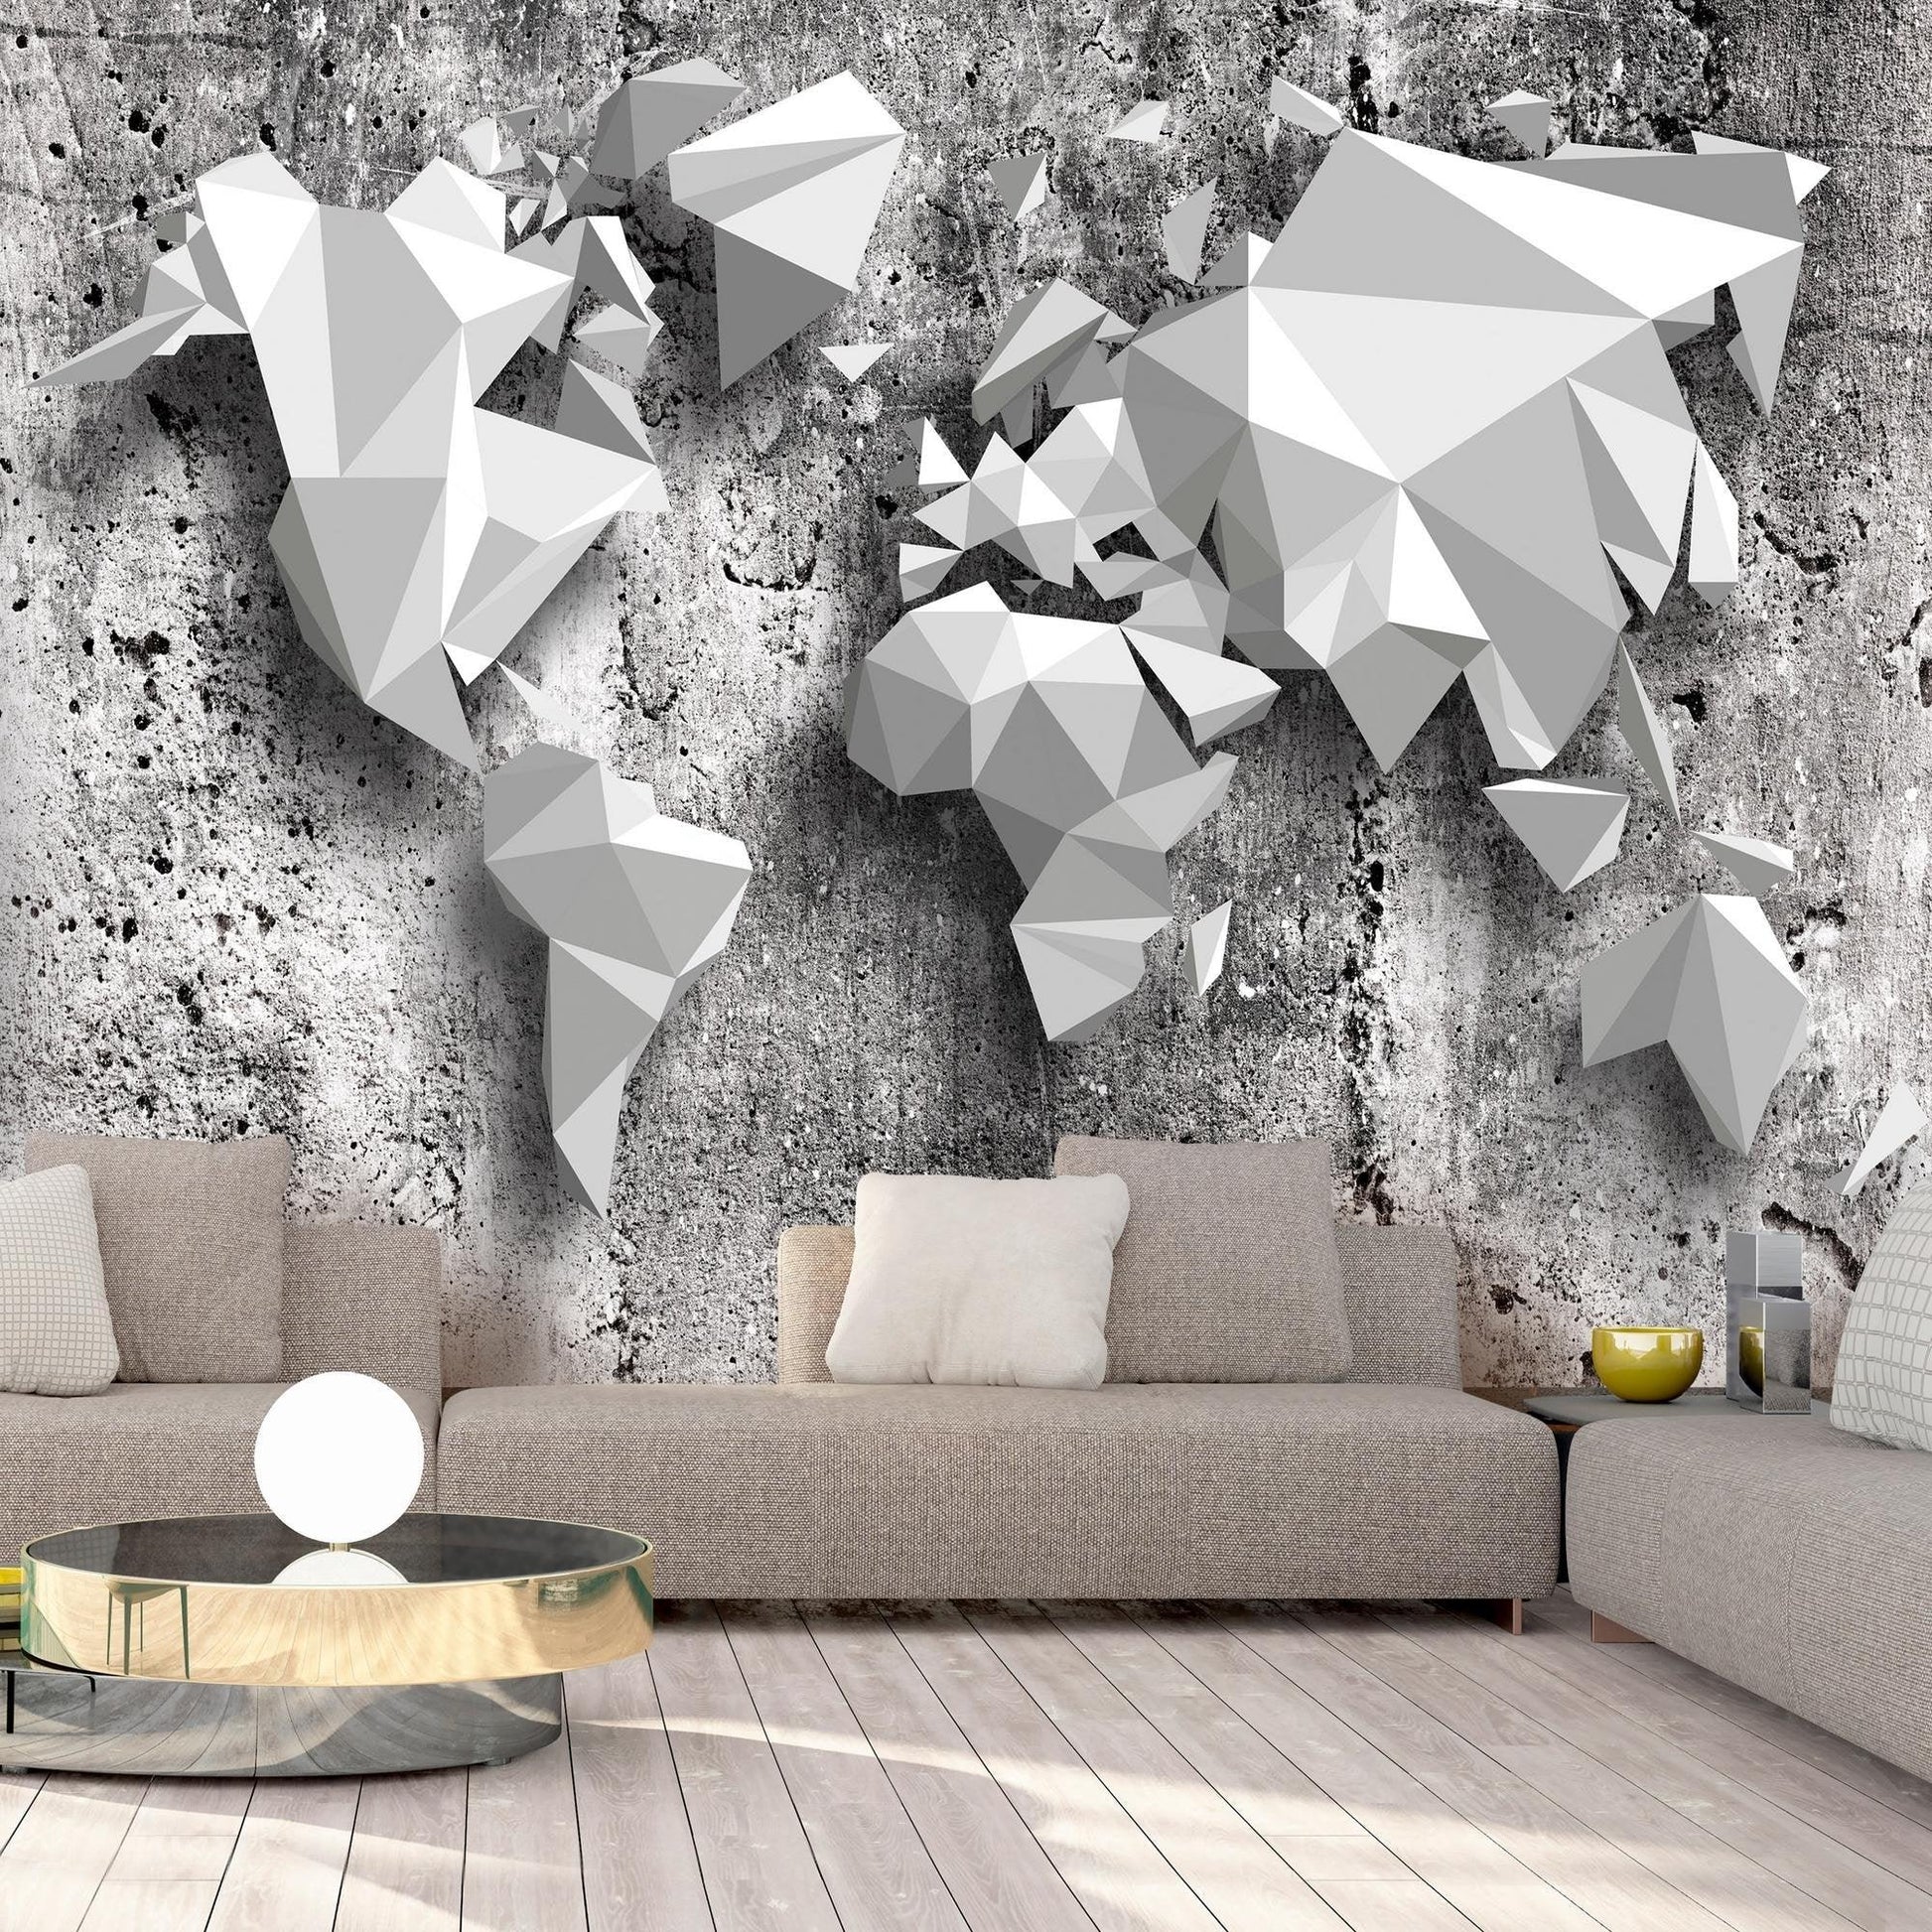 Peel and stick wall mural - World Map: Origami - www.trendingbestsellers.com